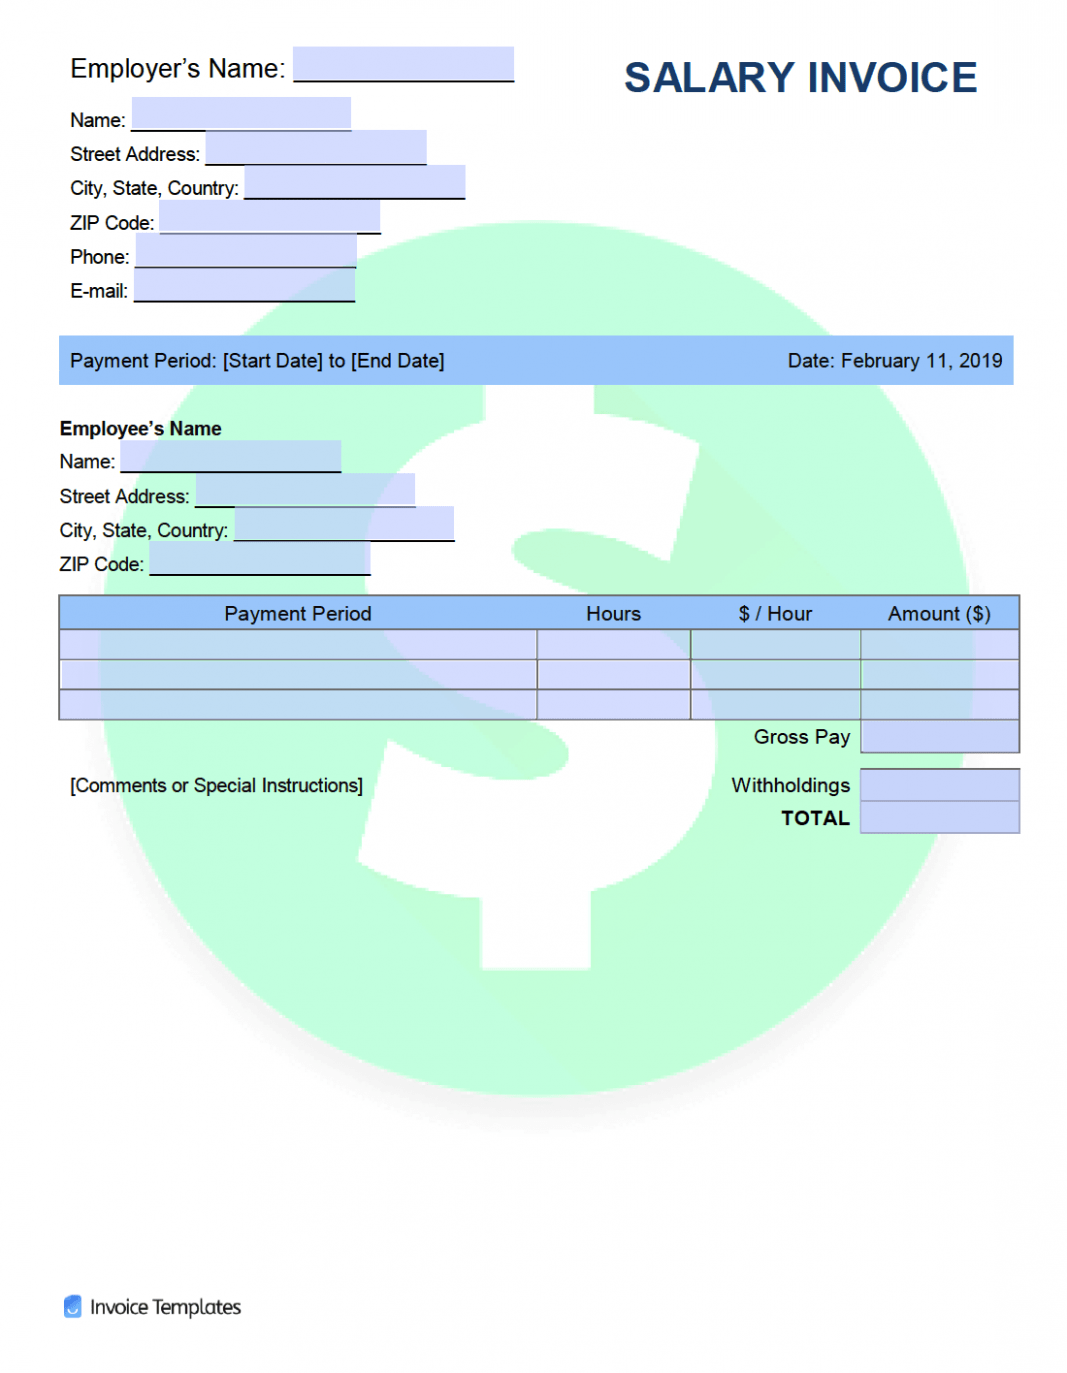 Sample Wage Invoice Template Excel